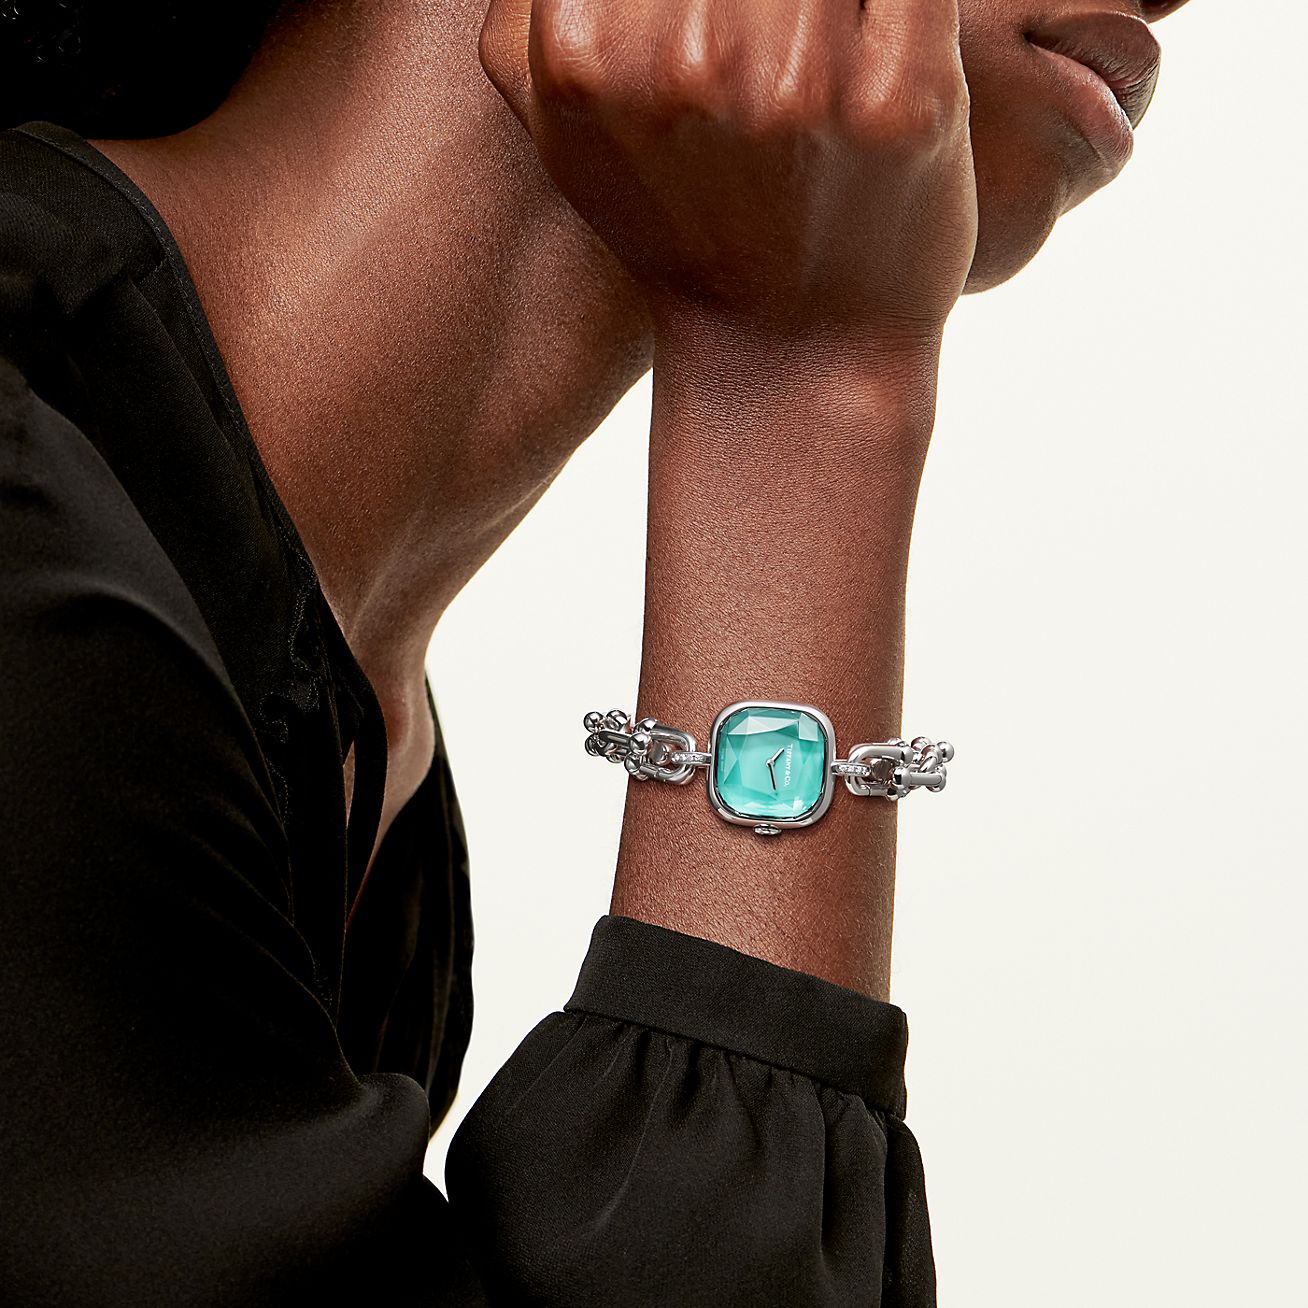 Tiffany 1837 Makers 22 mm square watch in stainless steel. | Tiffany & Co.